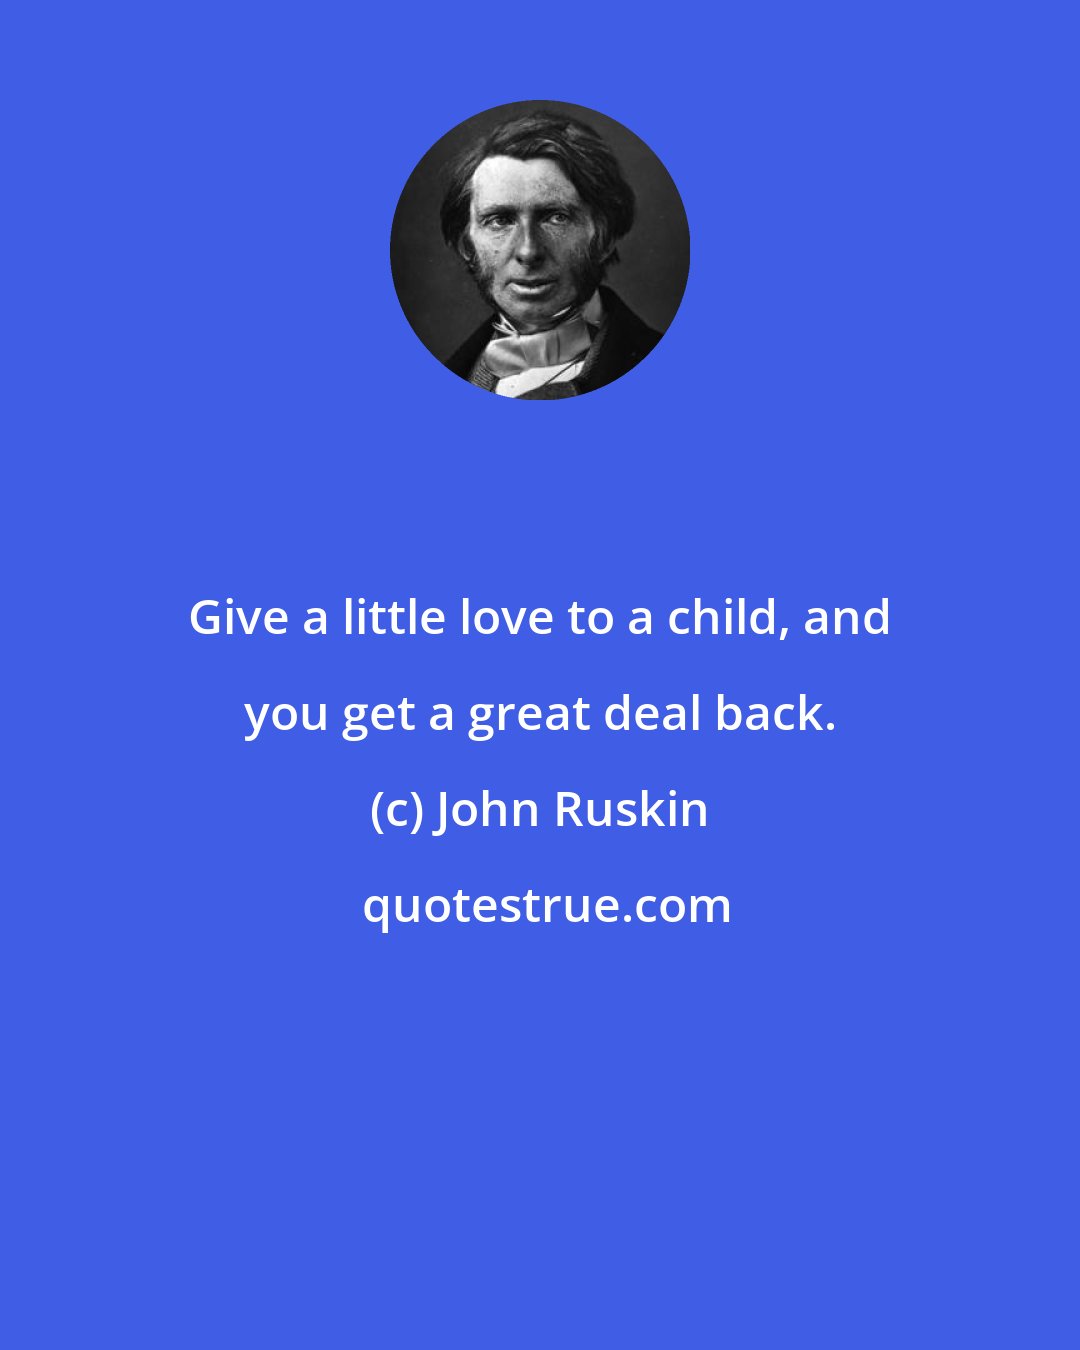 John Ruskin: Give a little love to a child, and you get a great deal back.